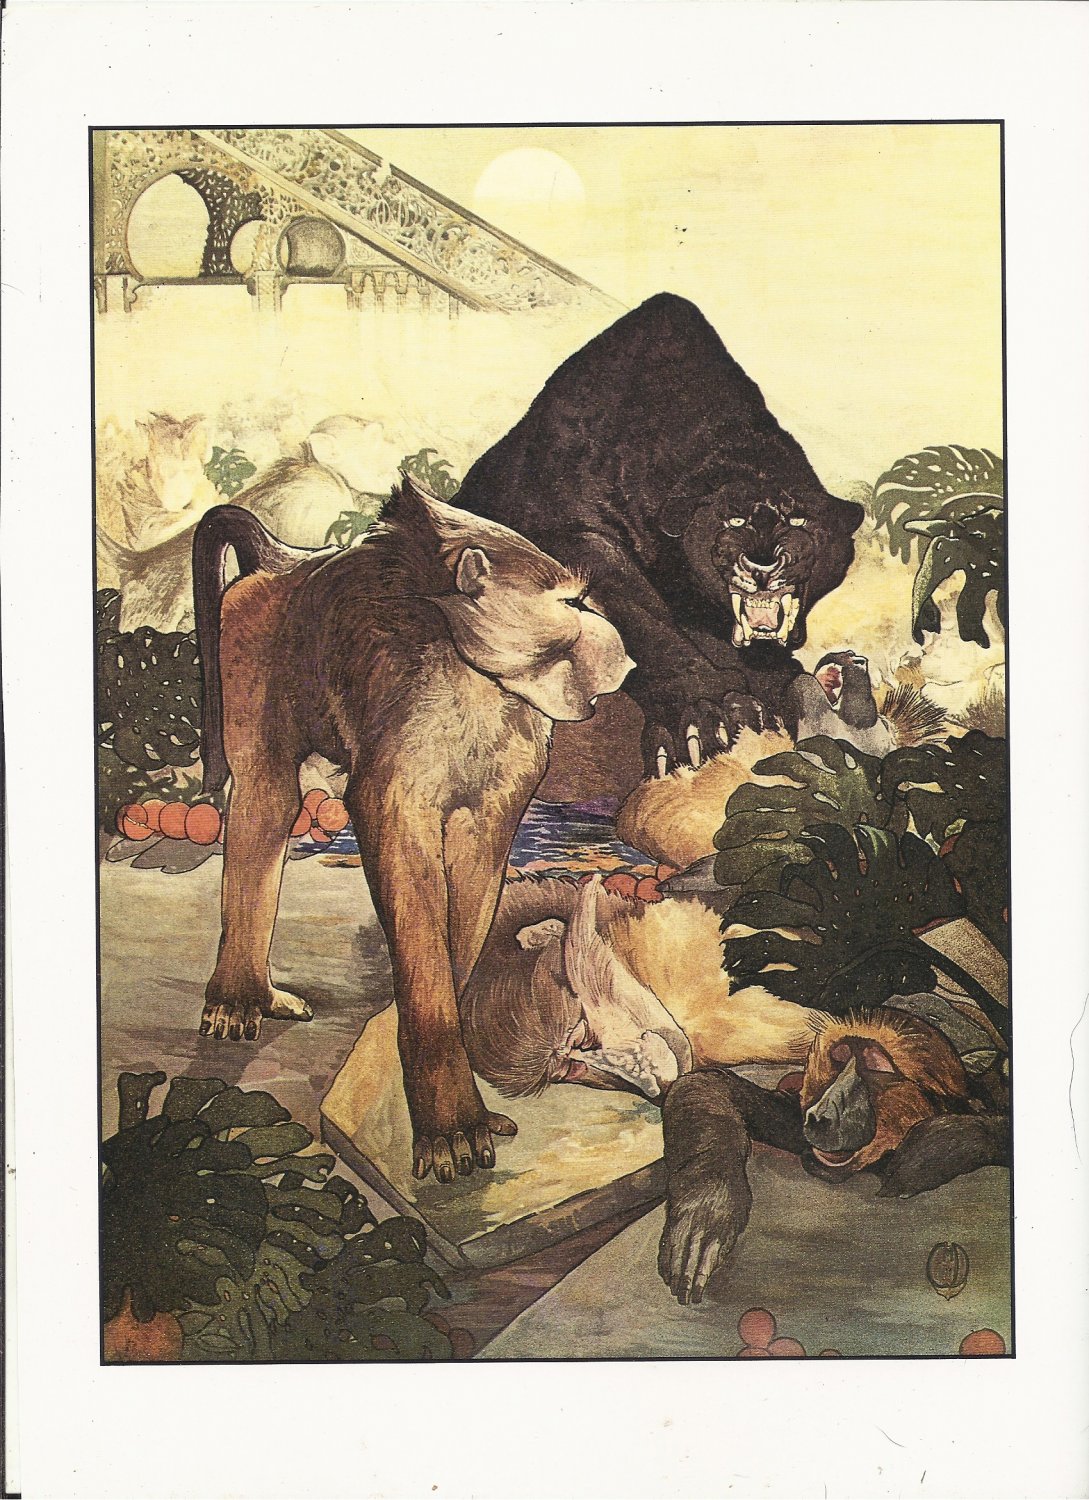 Charles Detmold: The Jungle Book - Monkey Fight - 11.75